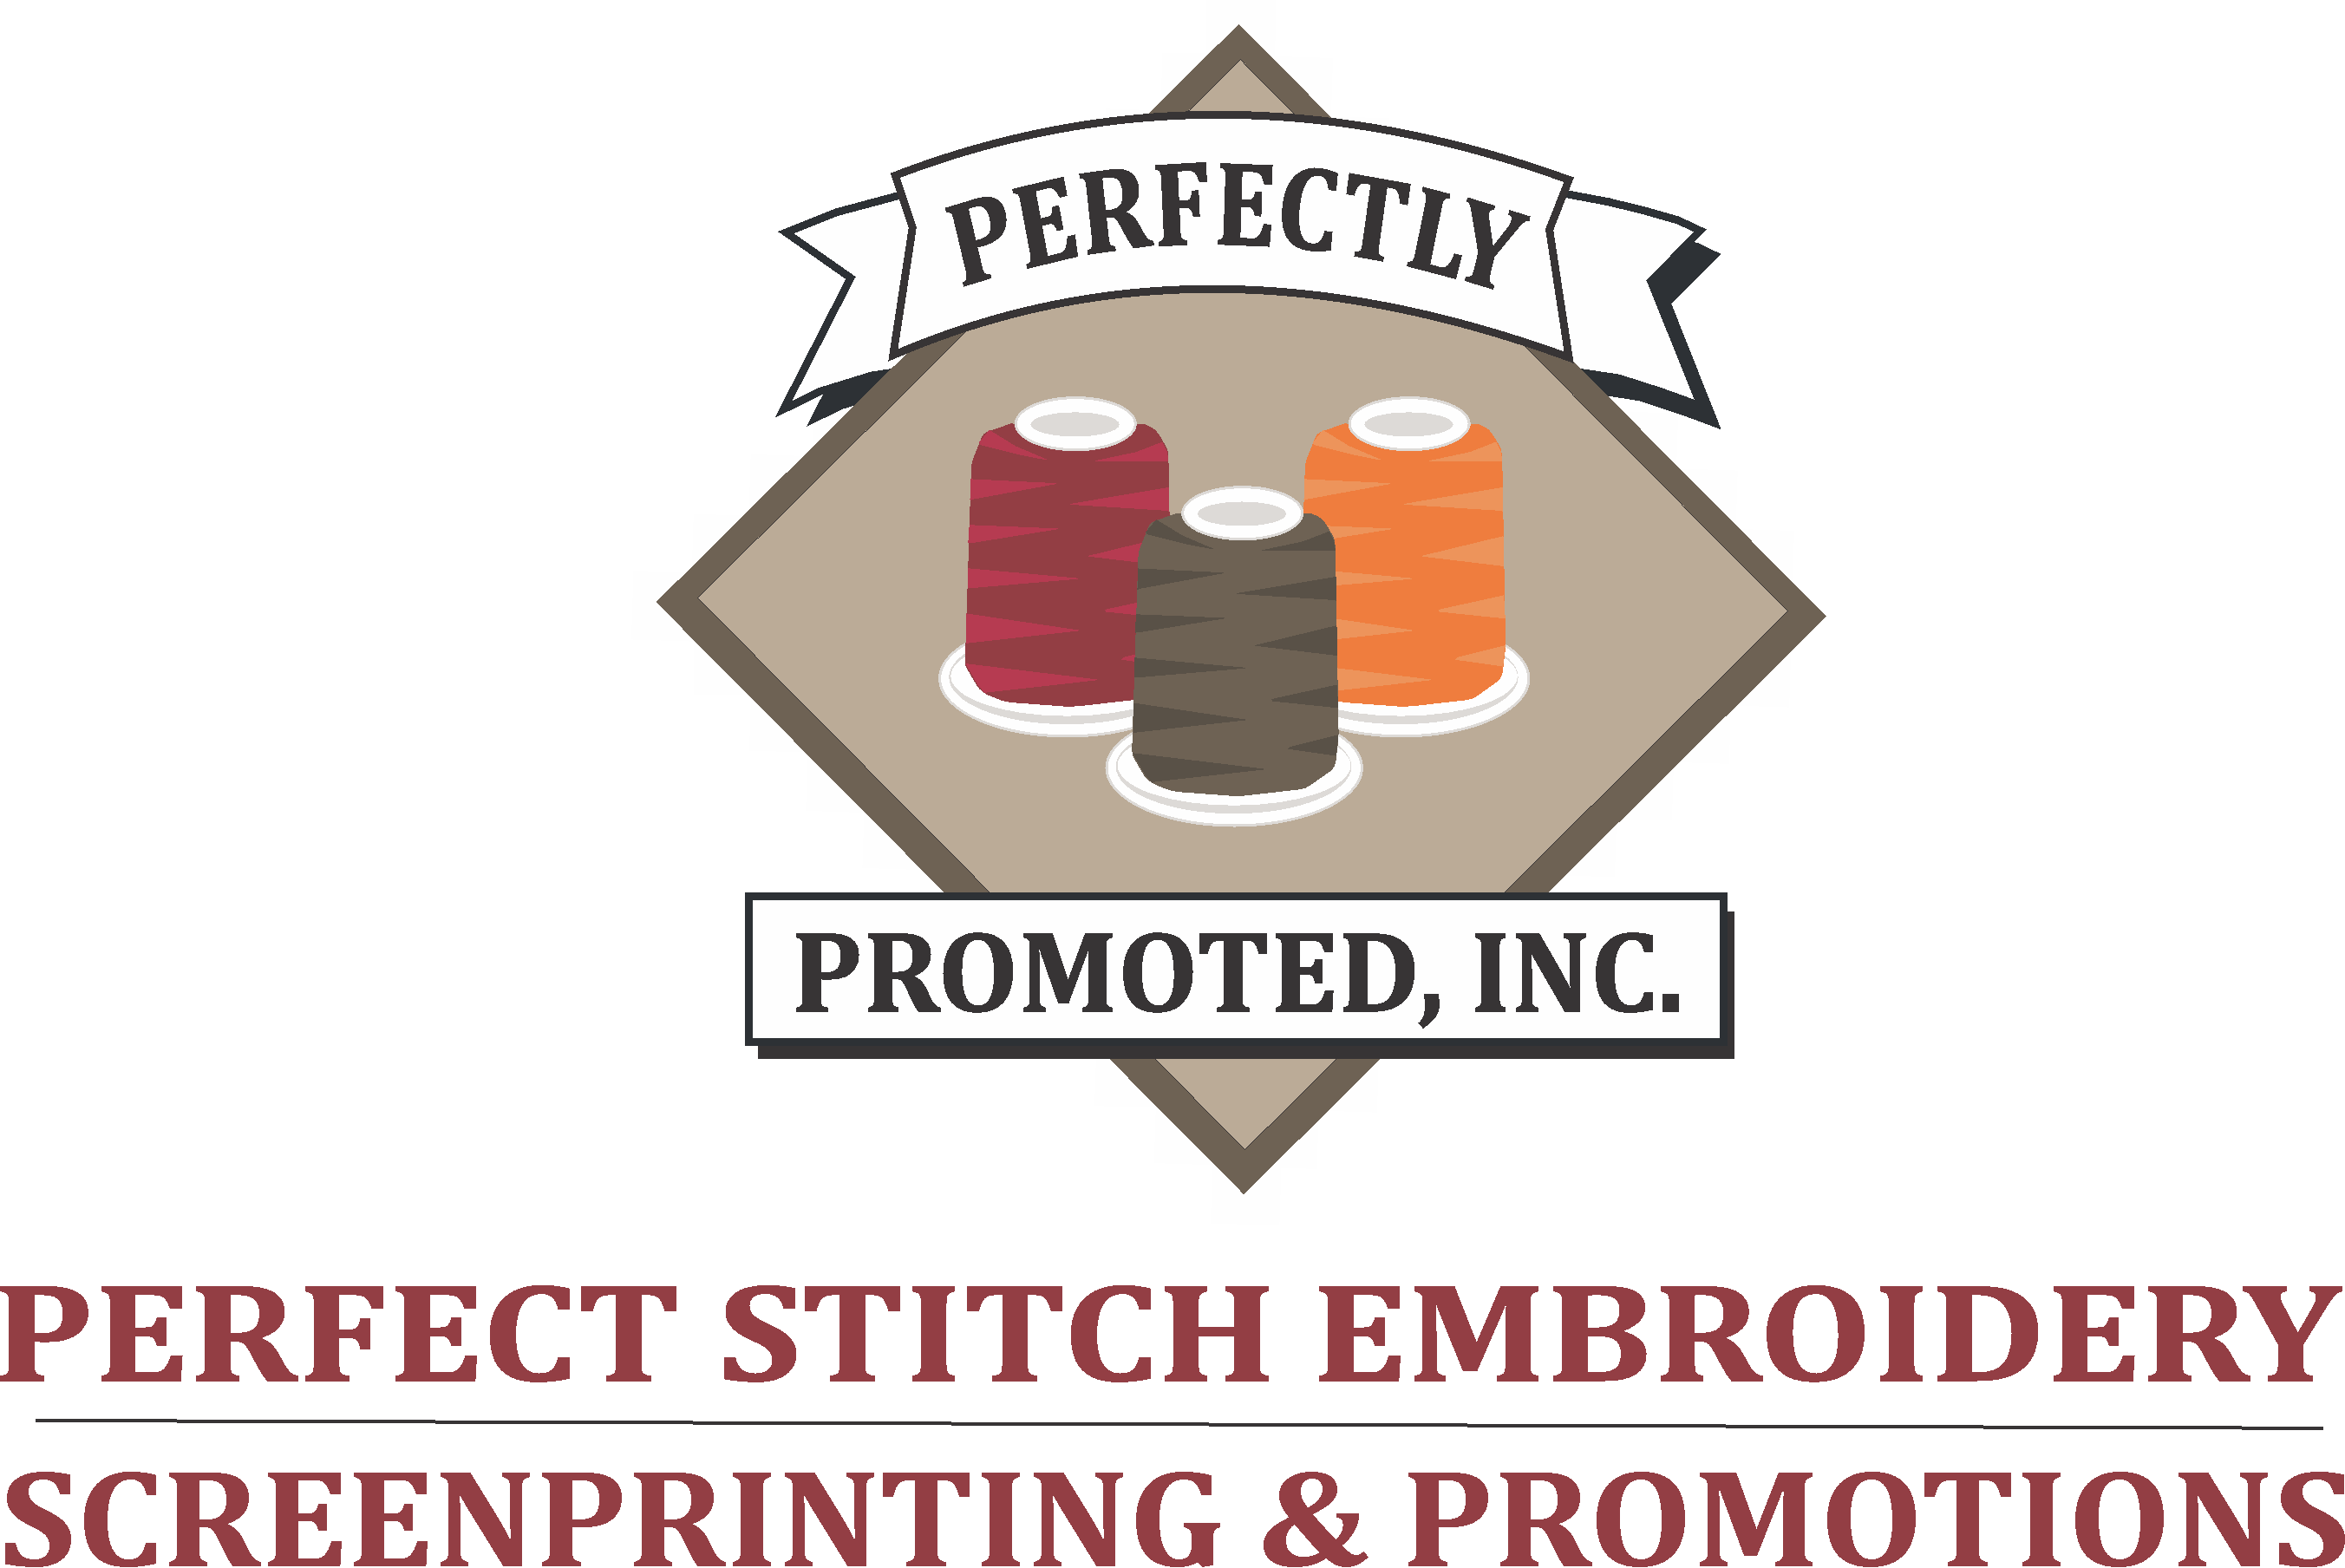 Perfect Stitch Embroidery, Screenprinting, & Promotions's Logo